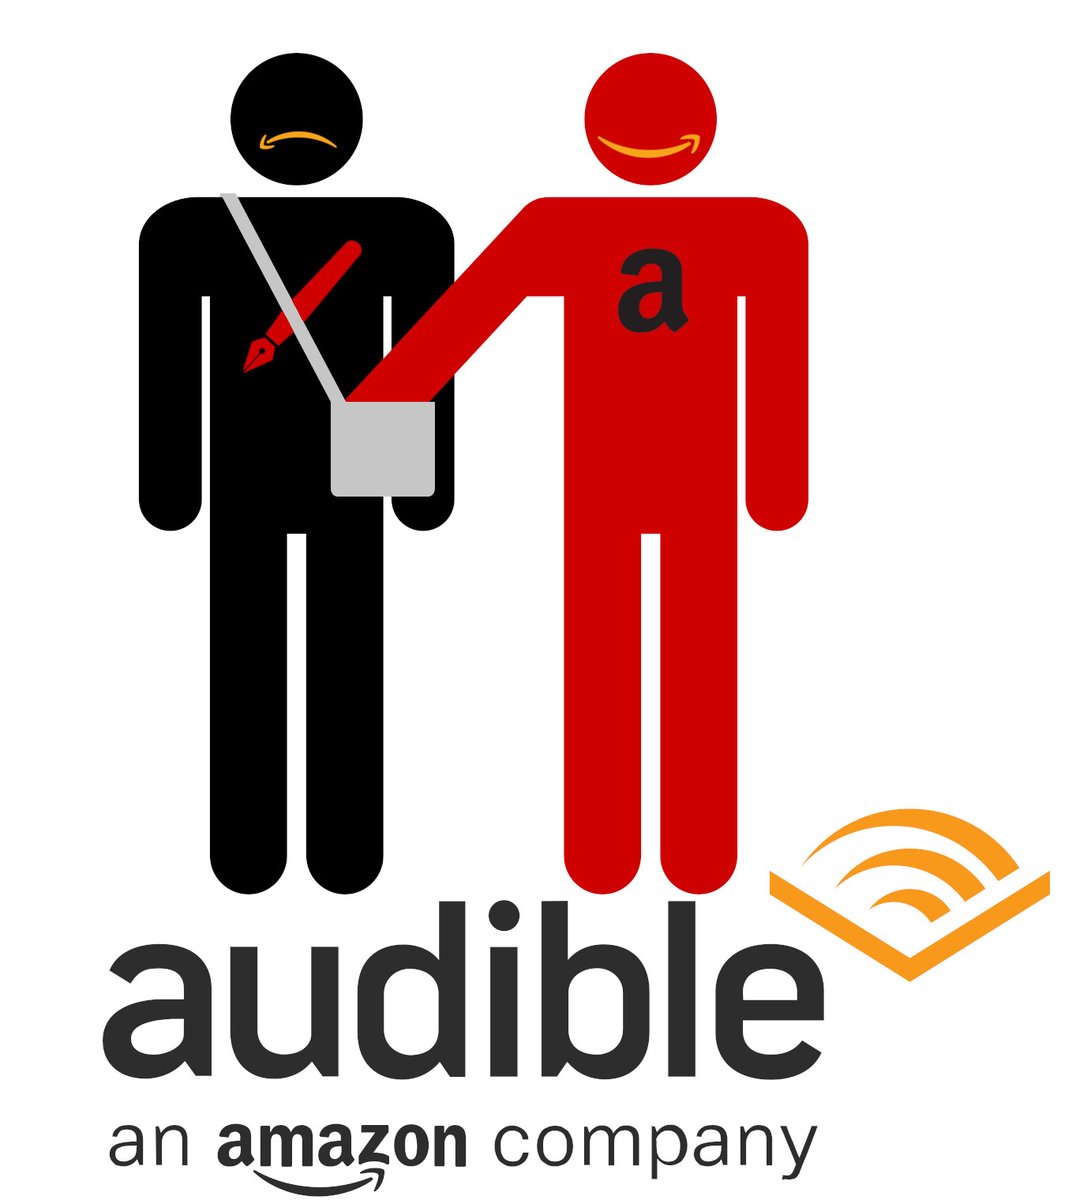 Amazon's ACX is a self-serve audiobook production platform: writers spend thousands of dollars to produce audiobooks of their own work. Amazon strongly incentivizes ACX producers to sell exclusively through Audible (which also distributes to Itunes).1/